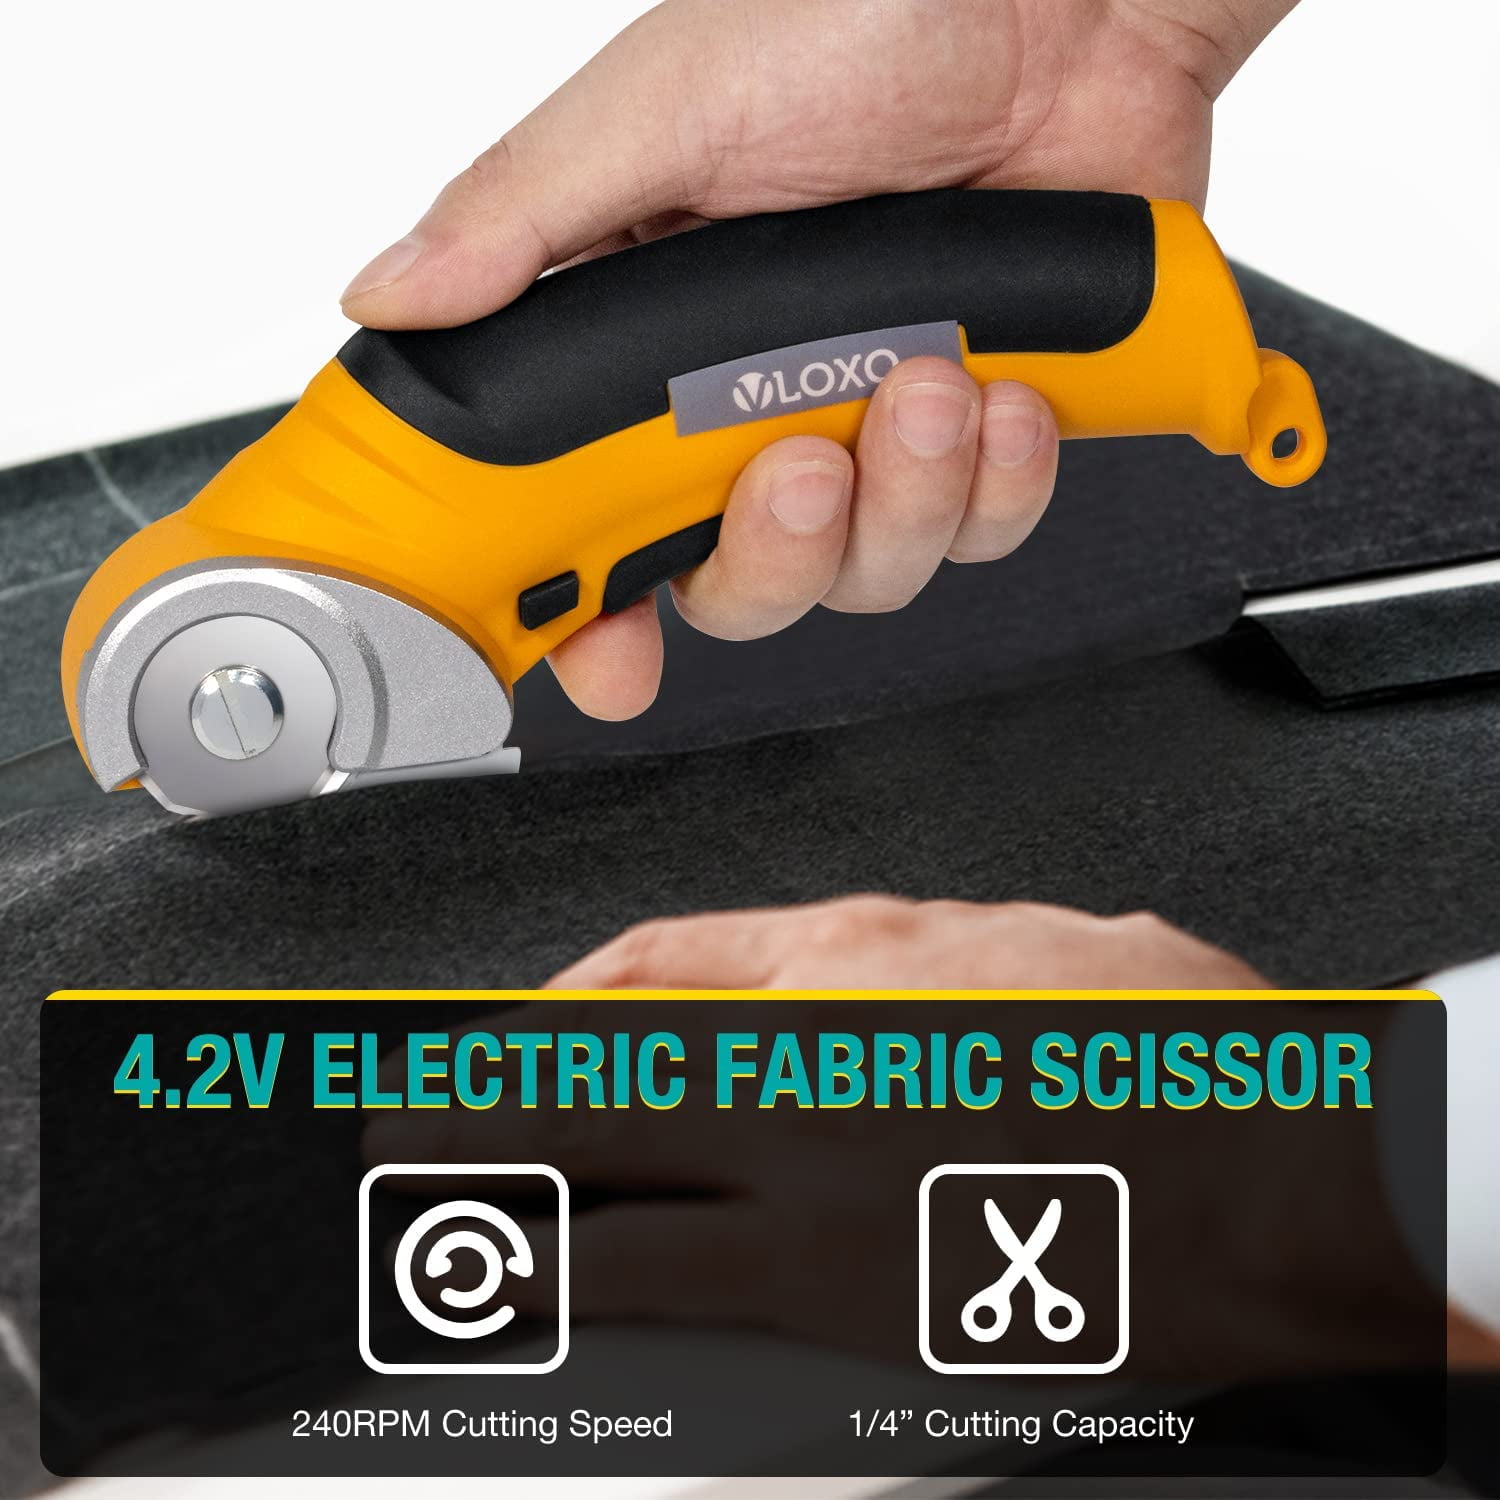  Cordless Electric Scissors, VLOXO Cardboard Cutter Electric  Fabric Scissors Box Cutter with Blades Rechargeable Powerful Fabric Cutter  for Crafts Leather Carboard Carpet Plastic Felt with Case Orange : Arts,  Crafts 